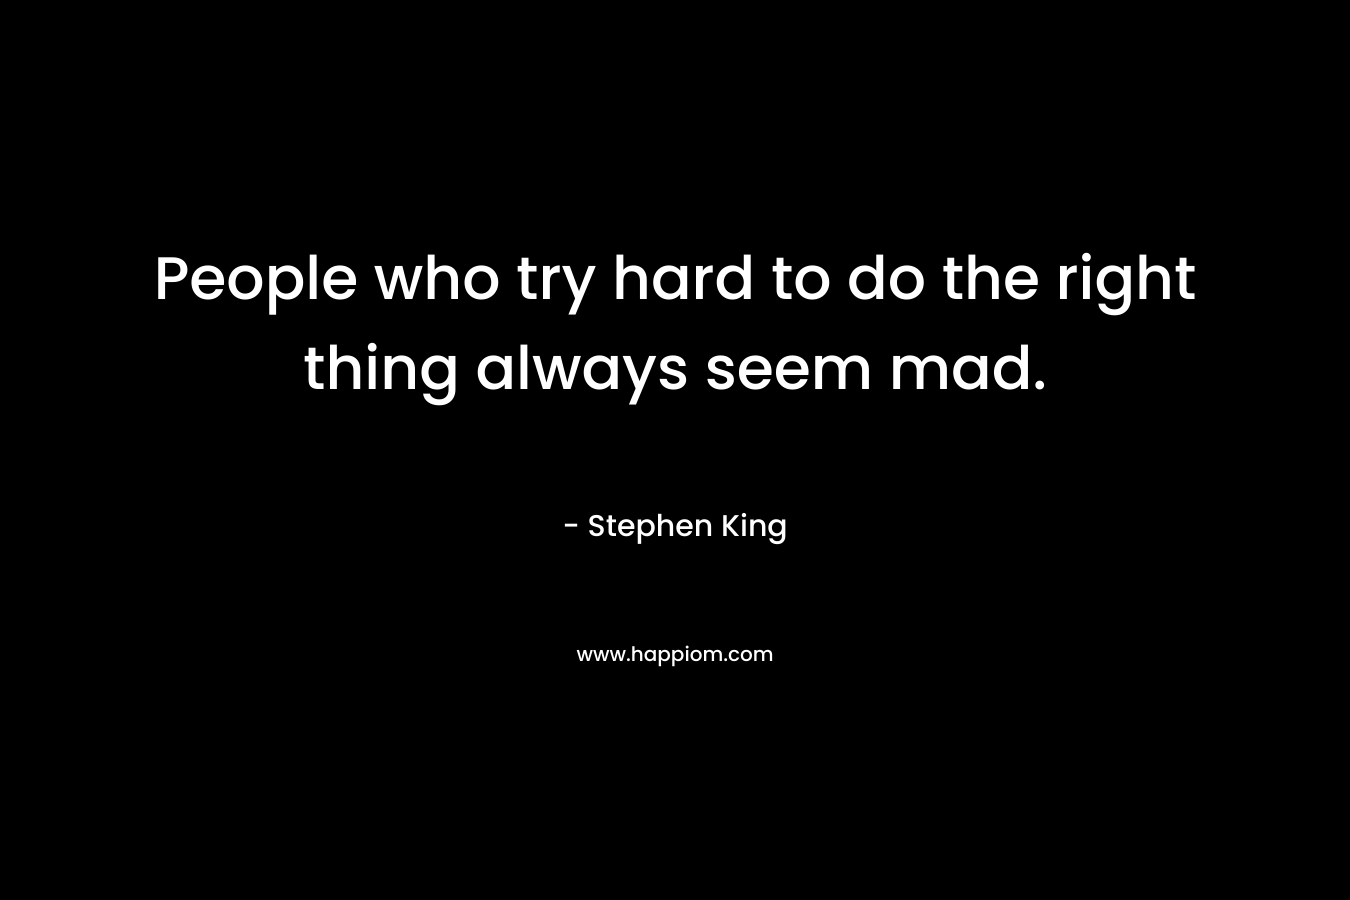 People who try hard to do the right thing always seem mad.